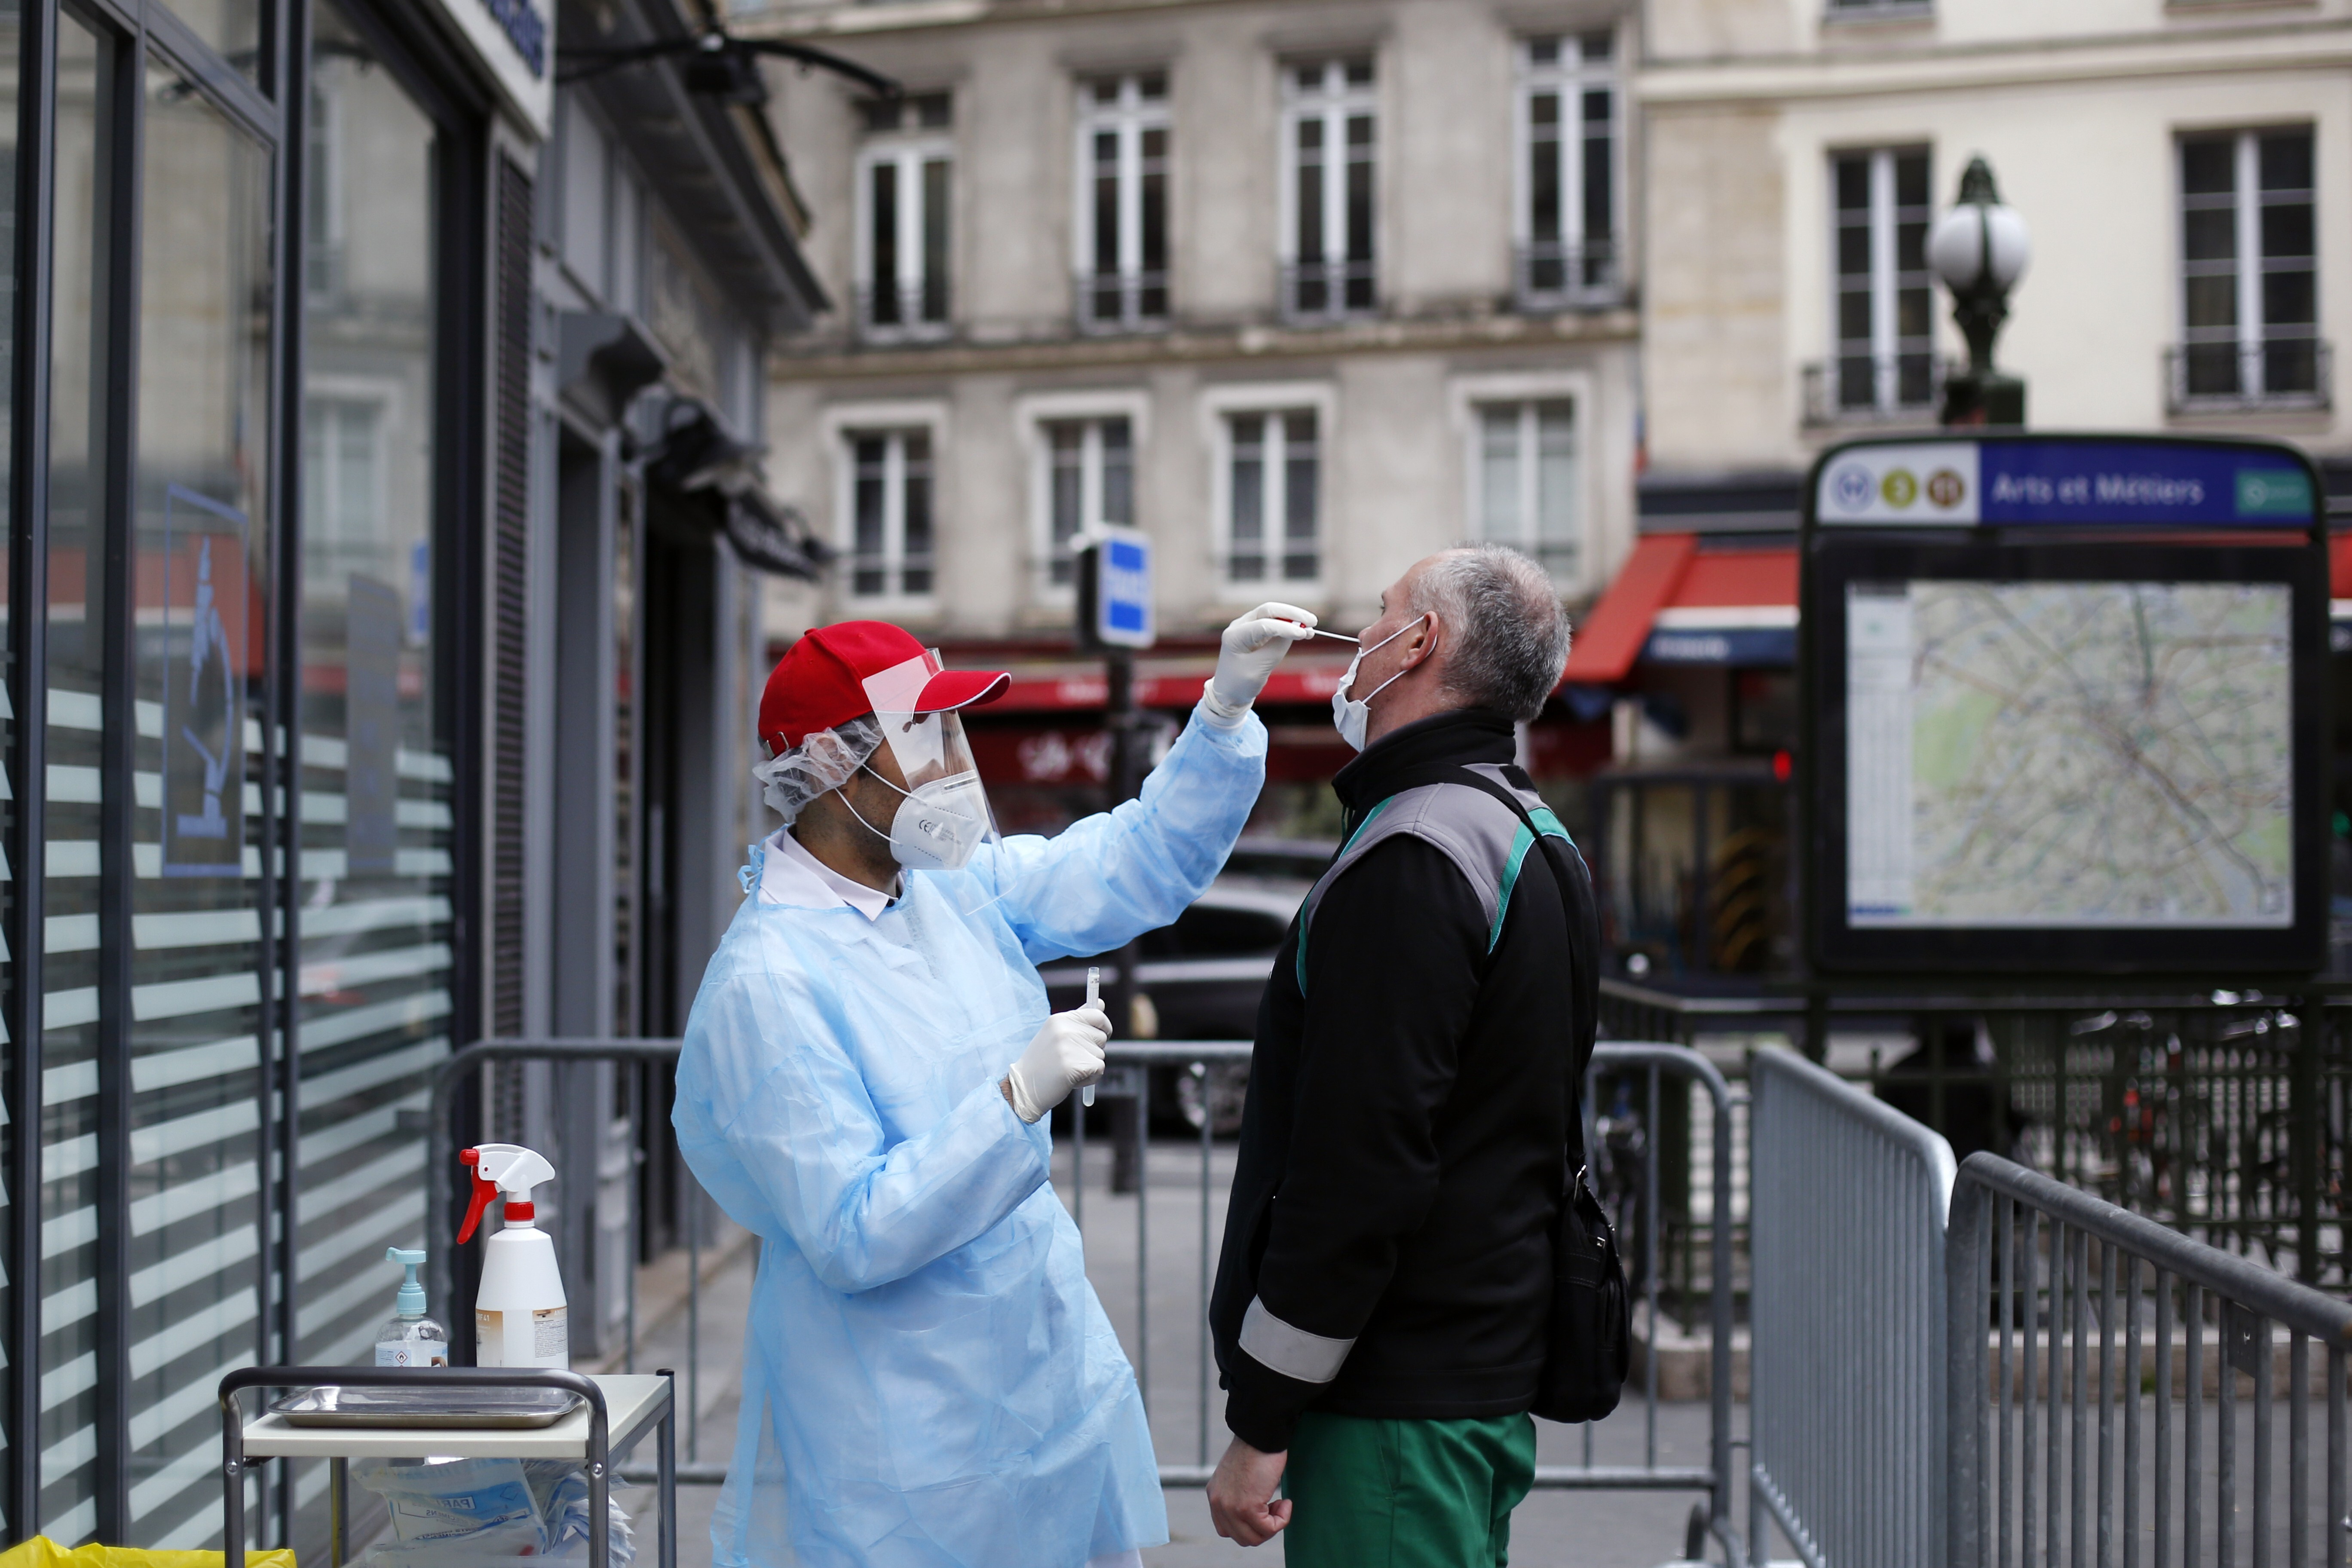 A health worker collects a nasal swab sample from a man to test for the coronavirus in Paris, as France cautiously eases its two-month lockdown. Photo: AP